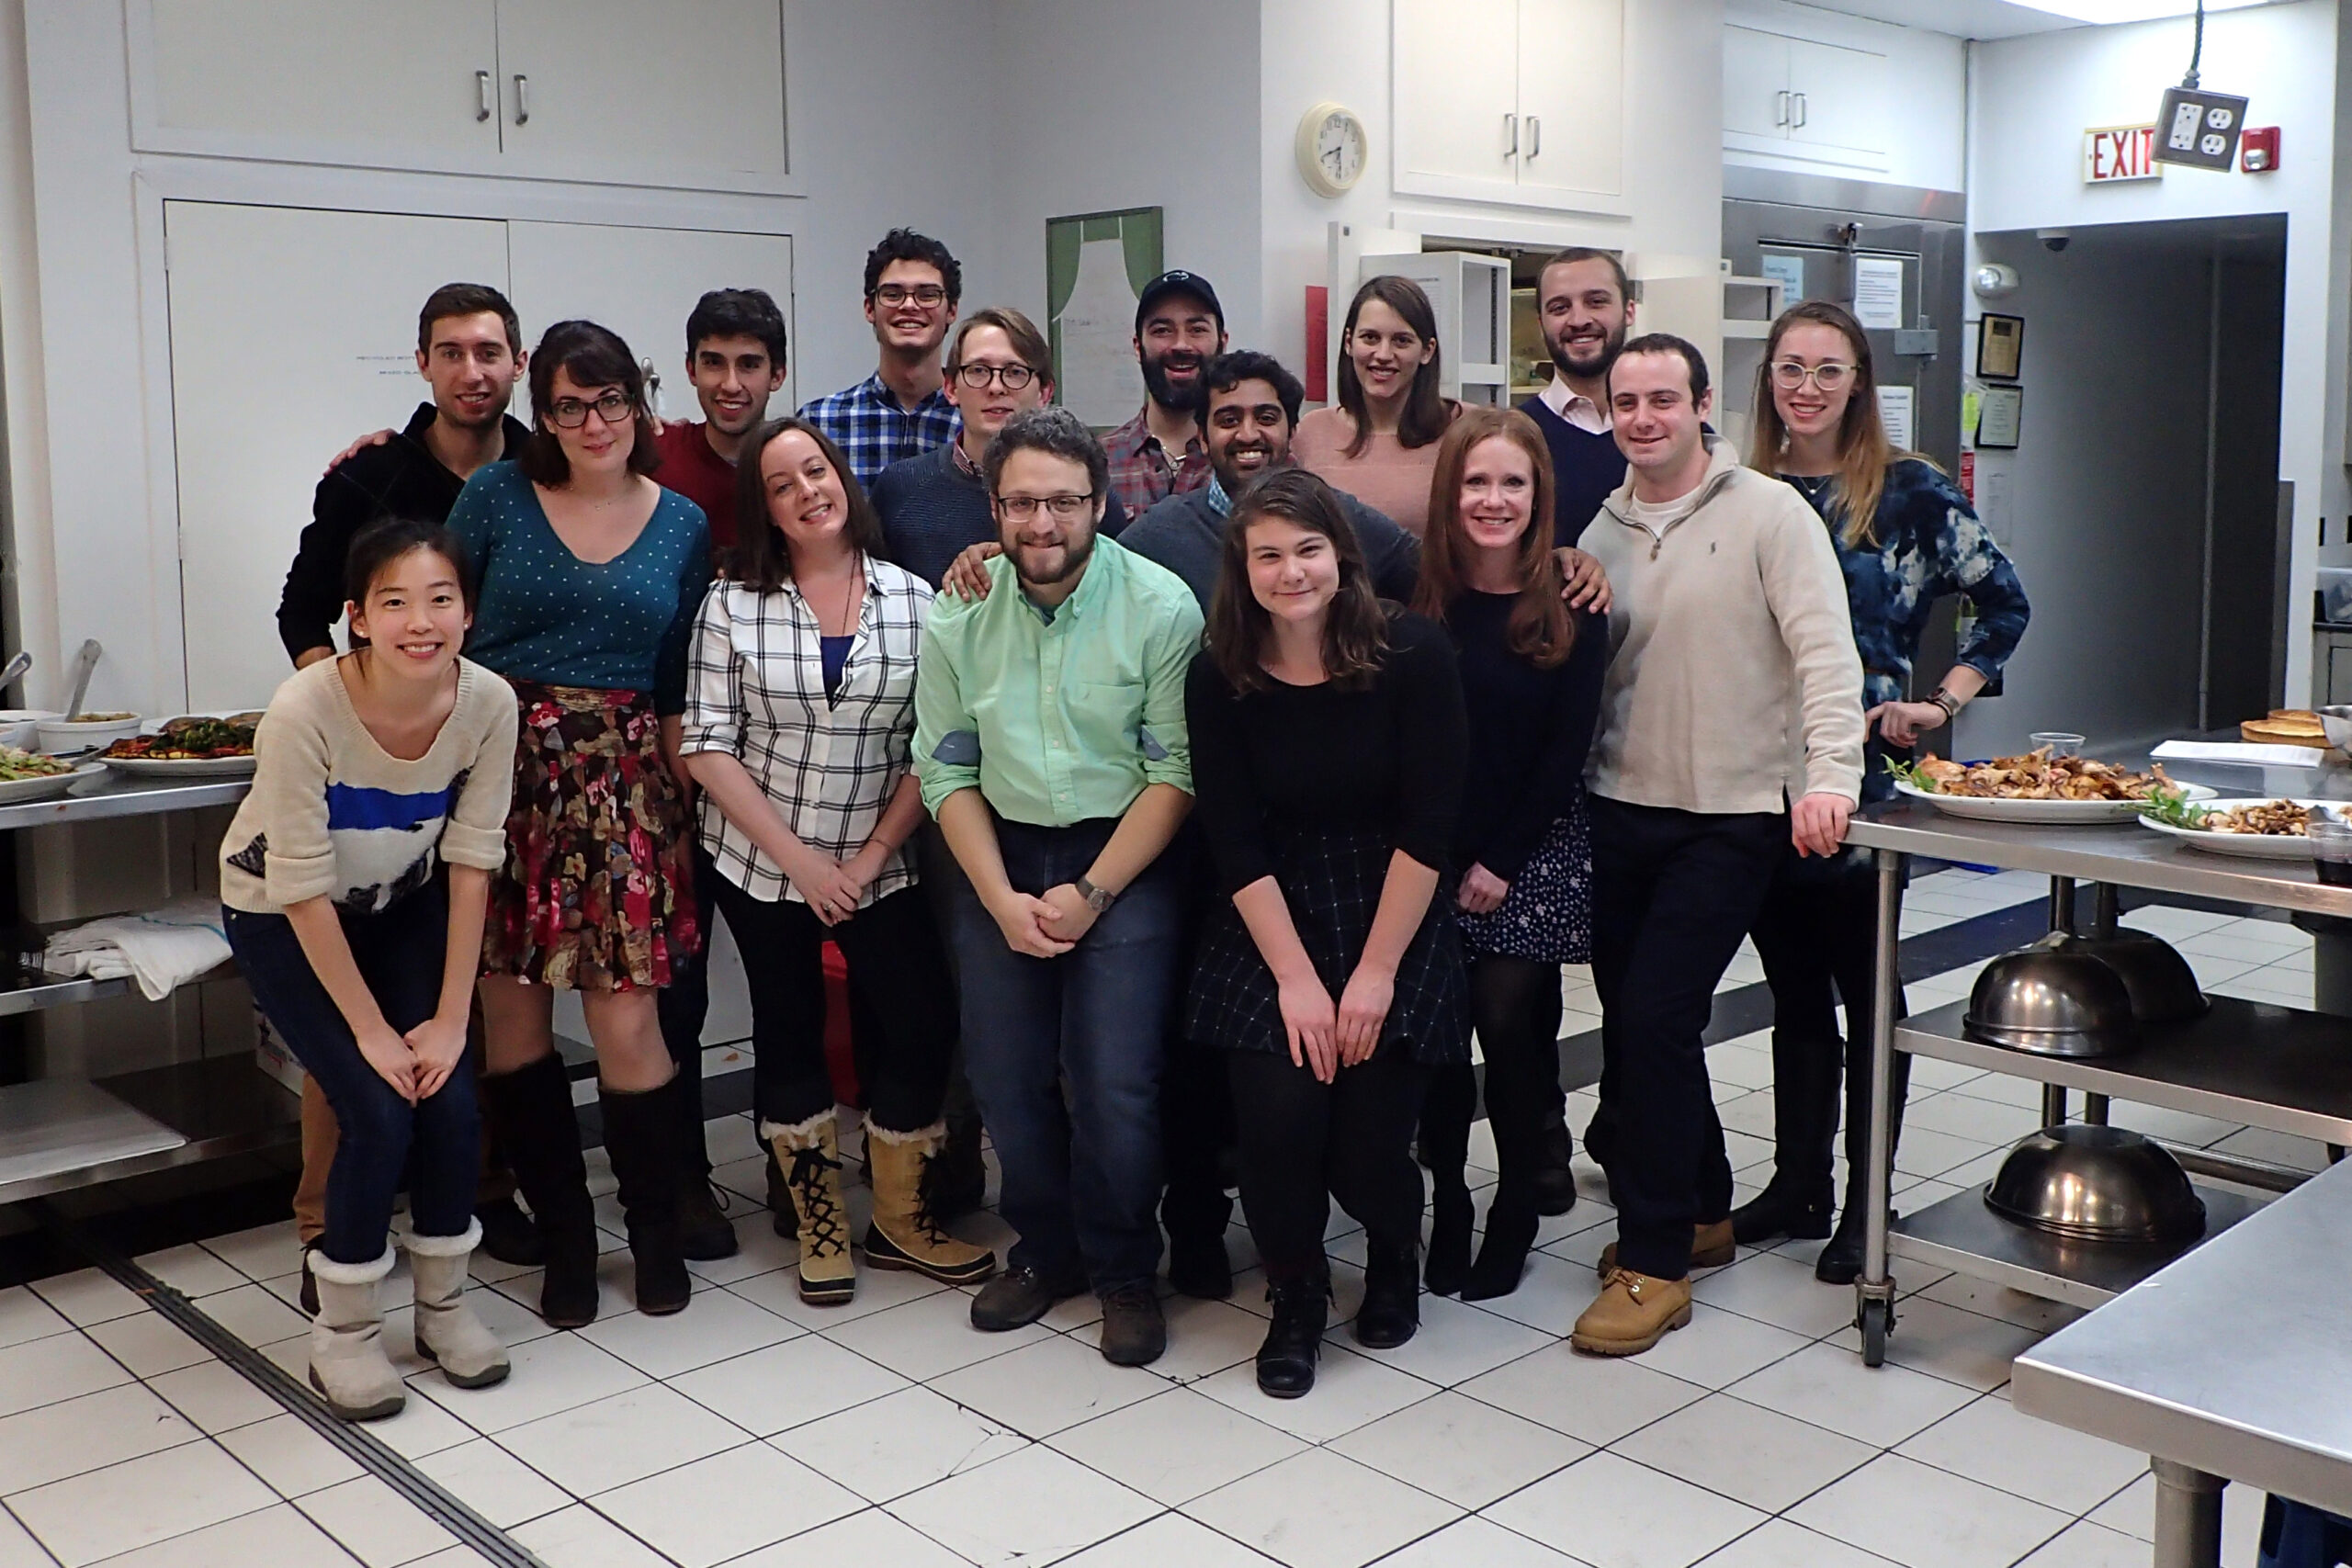 The lab poses for a group photo after a successful cooking class for the holidays! (2016)